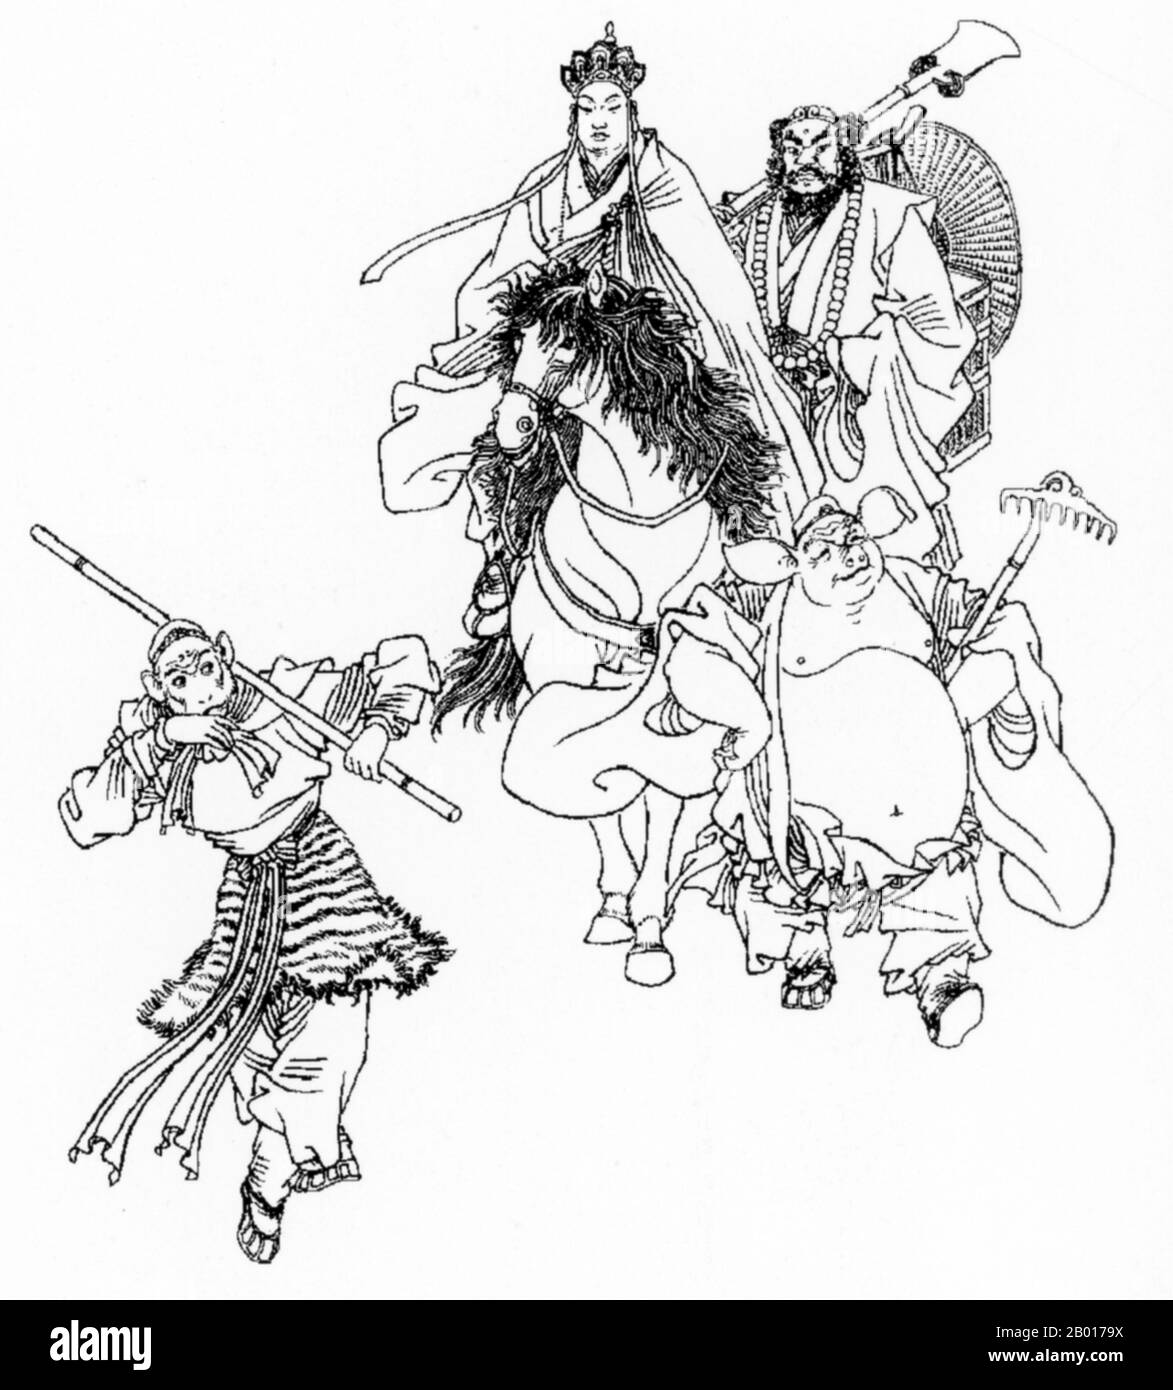 China: A drawing of the monk Xuanzang with his companions from the Xiyouji or 'Journey to the West'.  Journey to the West is one of the Four Great Classical Novels of Chinese literature. Originally published anonymously in the 1590s during the Ming Dynasty, its authorship has been ascribed to the scholar Wu Cheng'en since the 20th century. In English-speaking countries, the tale is also often known simply as Monkey.  The novel is a fictionalised account of the legendary pilgrimage to India of the Buddhist monk Xuanzang. The monk travelled to the Western Regions during the Tang dynasty. Stock Photo